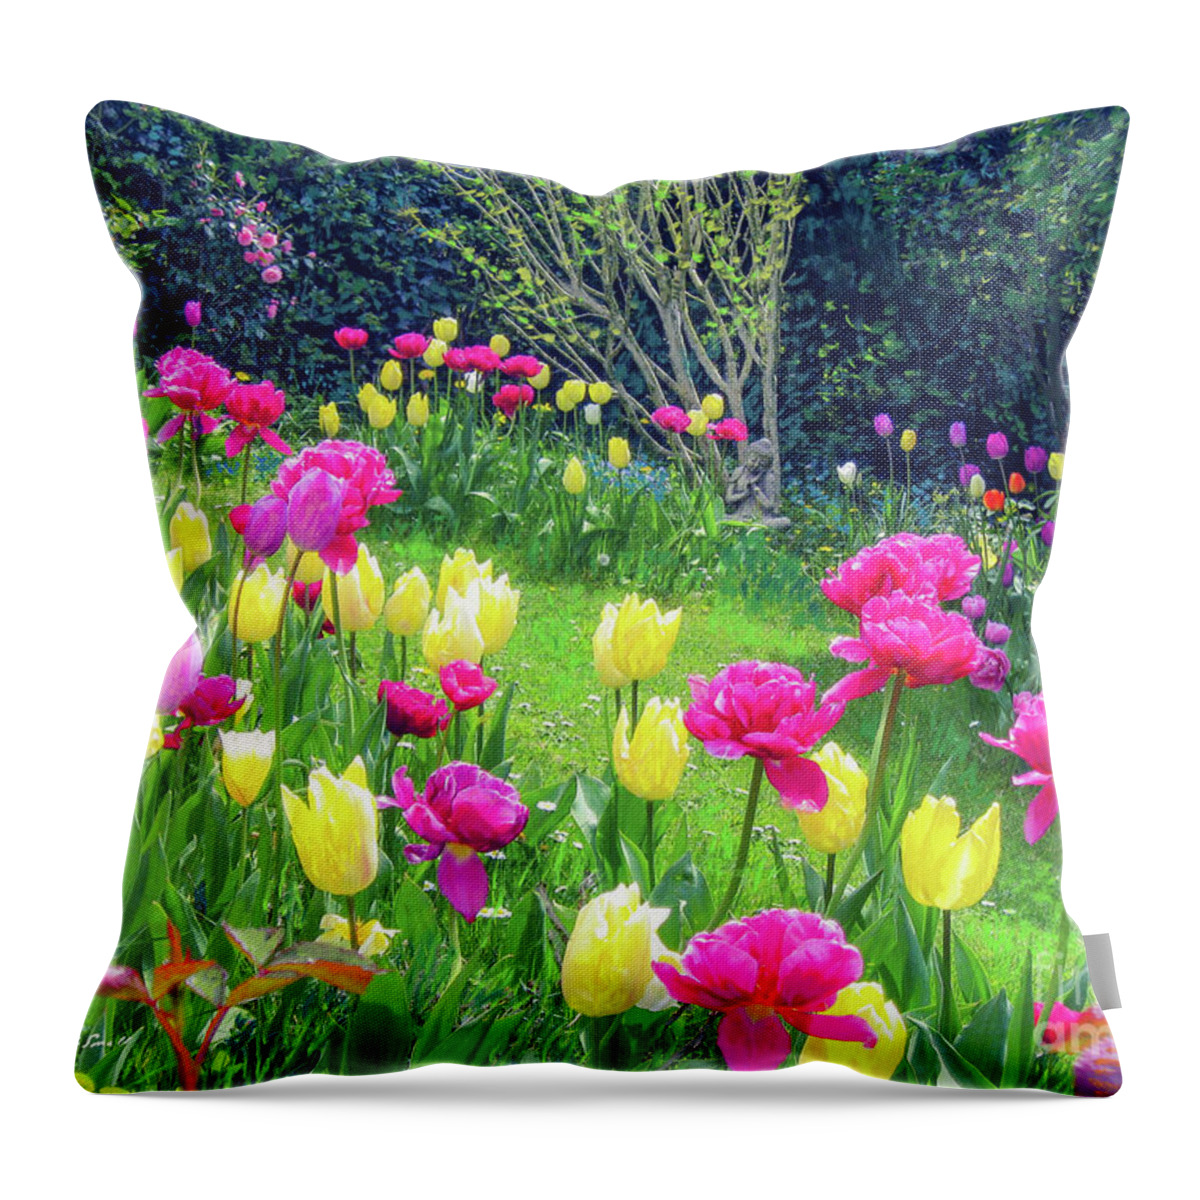 Landscape Throw Pillow featuring the painting Bright Spring Blessings by Jane Small